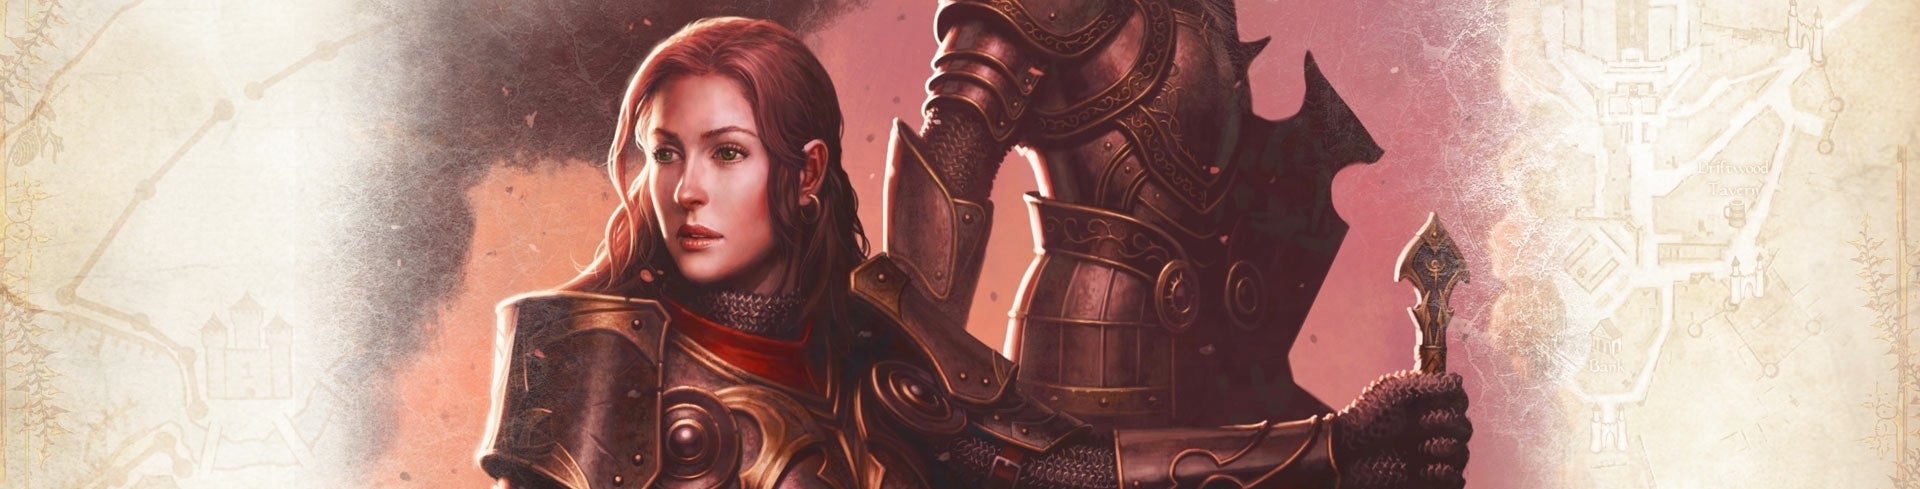 Image for Don't rule free-to-play MMO Neverwinter out